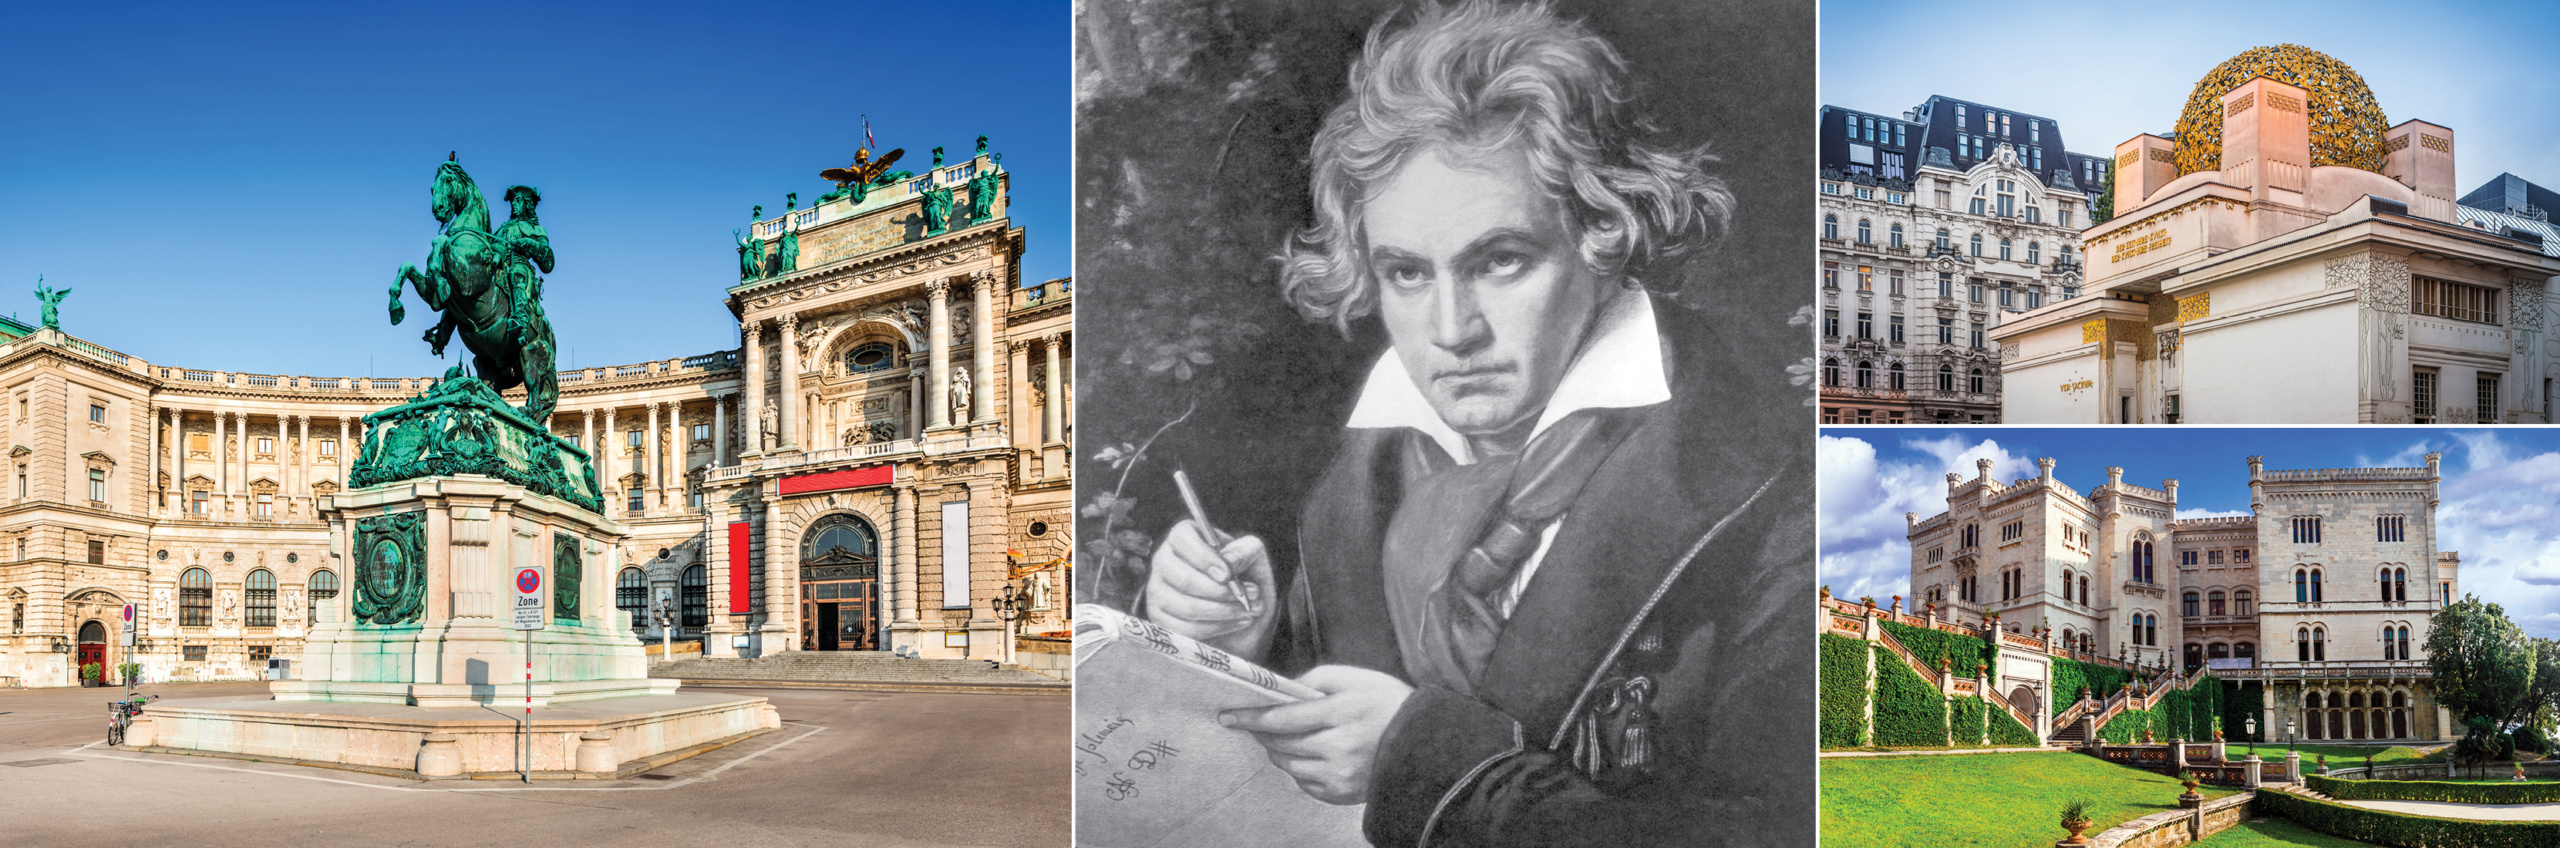 Beethoven and Vienna landscapes